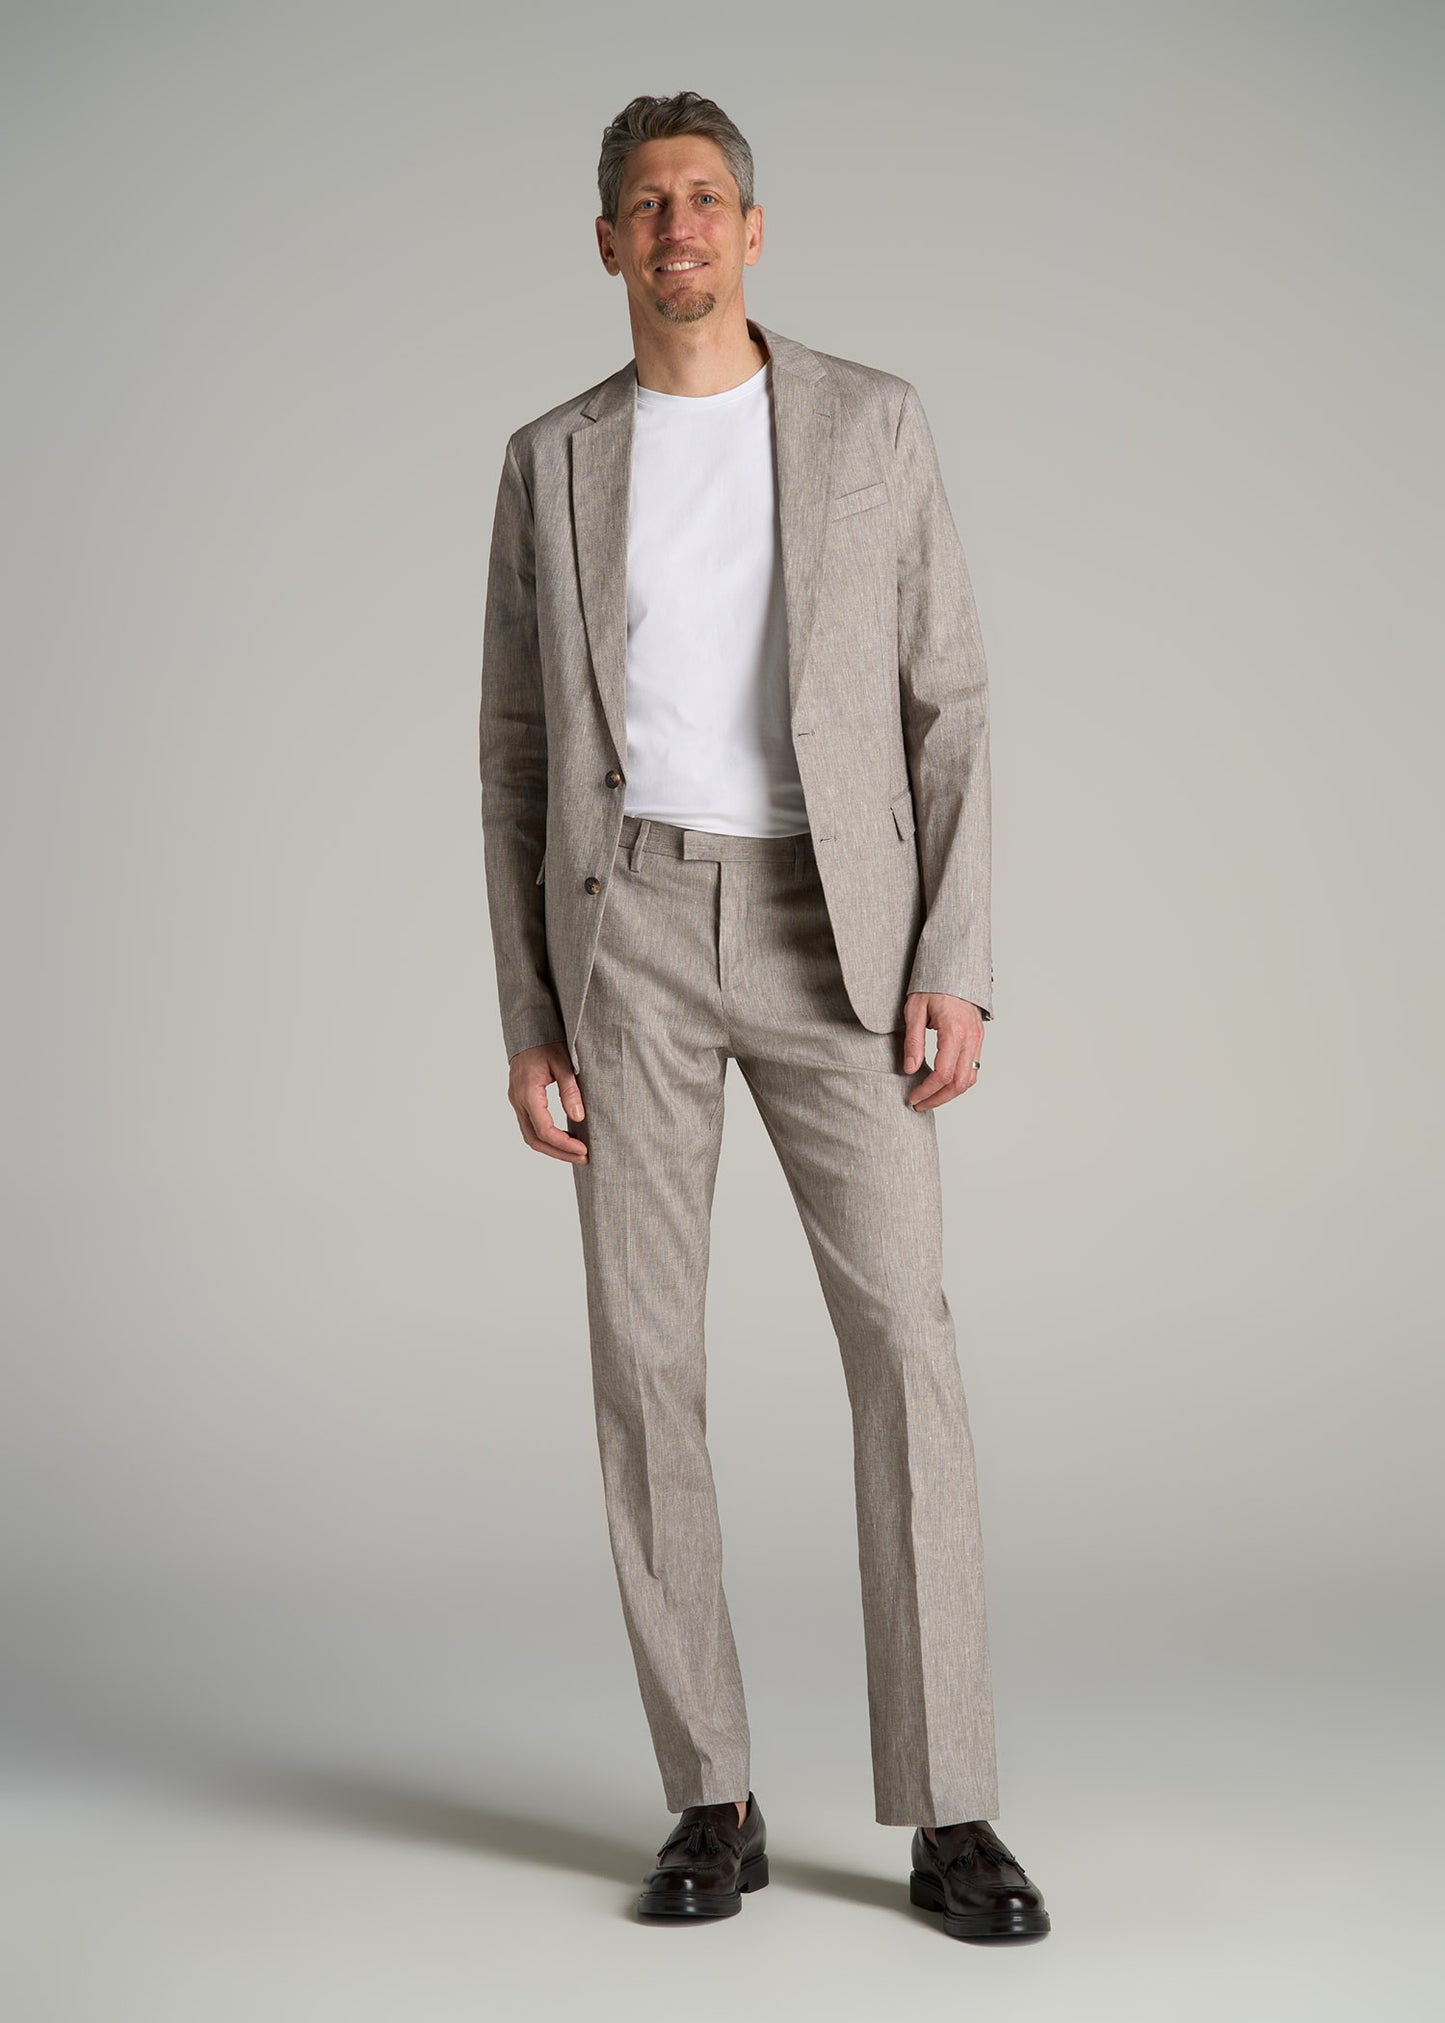 A tall man wearing Stretch Linen Blazer for Tall Men in Brown Linen from American Tall